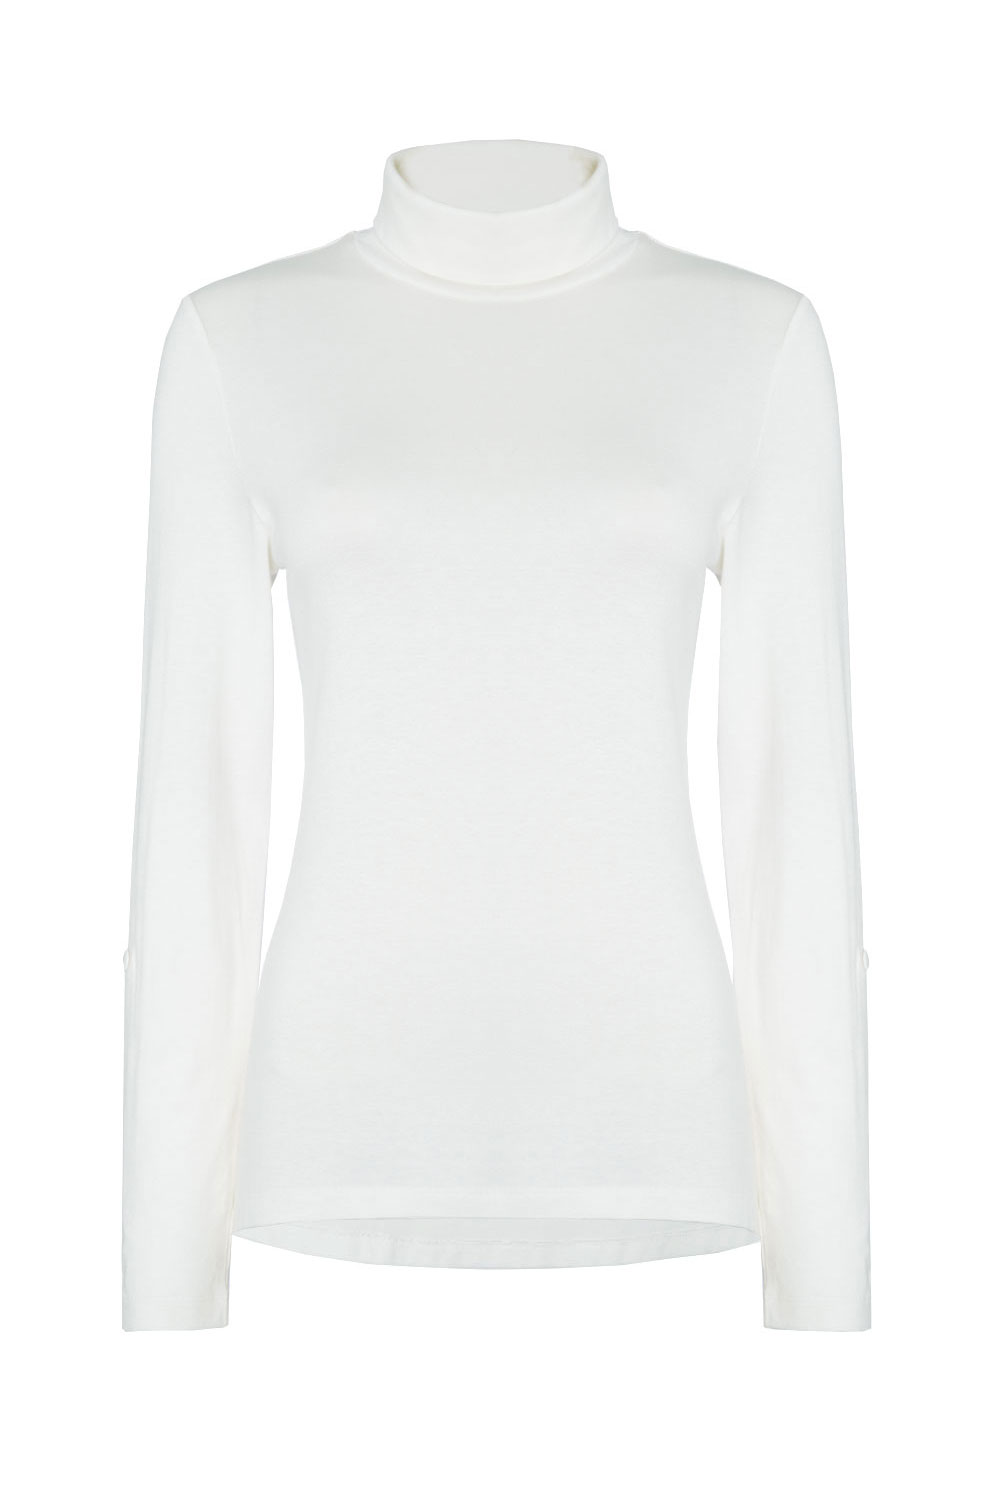 Women’s Roll Neck Top | WCT | Patra